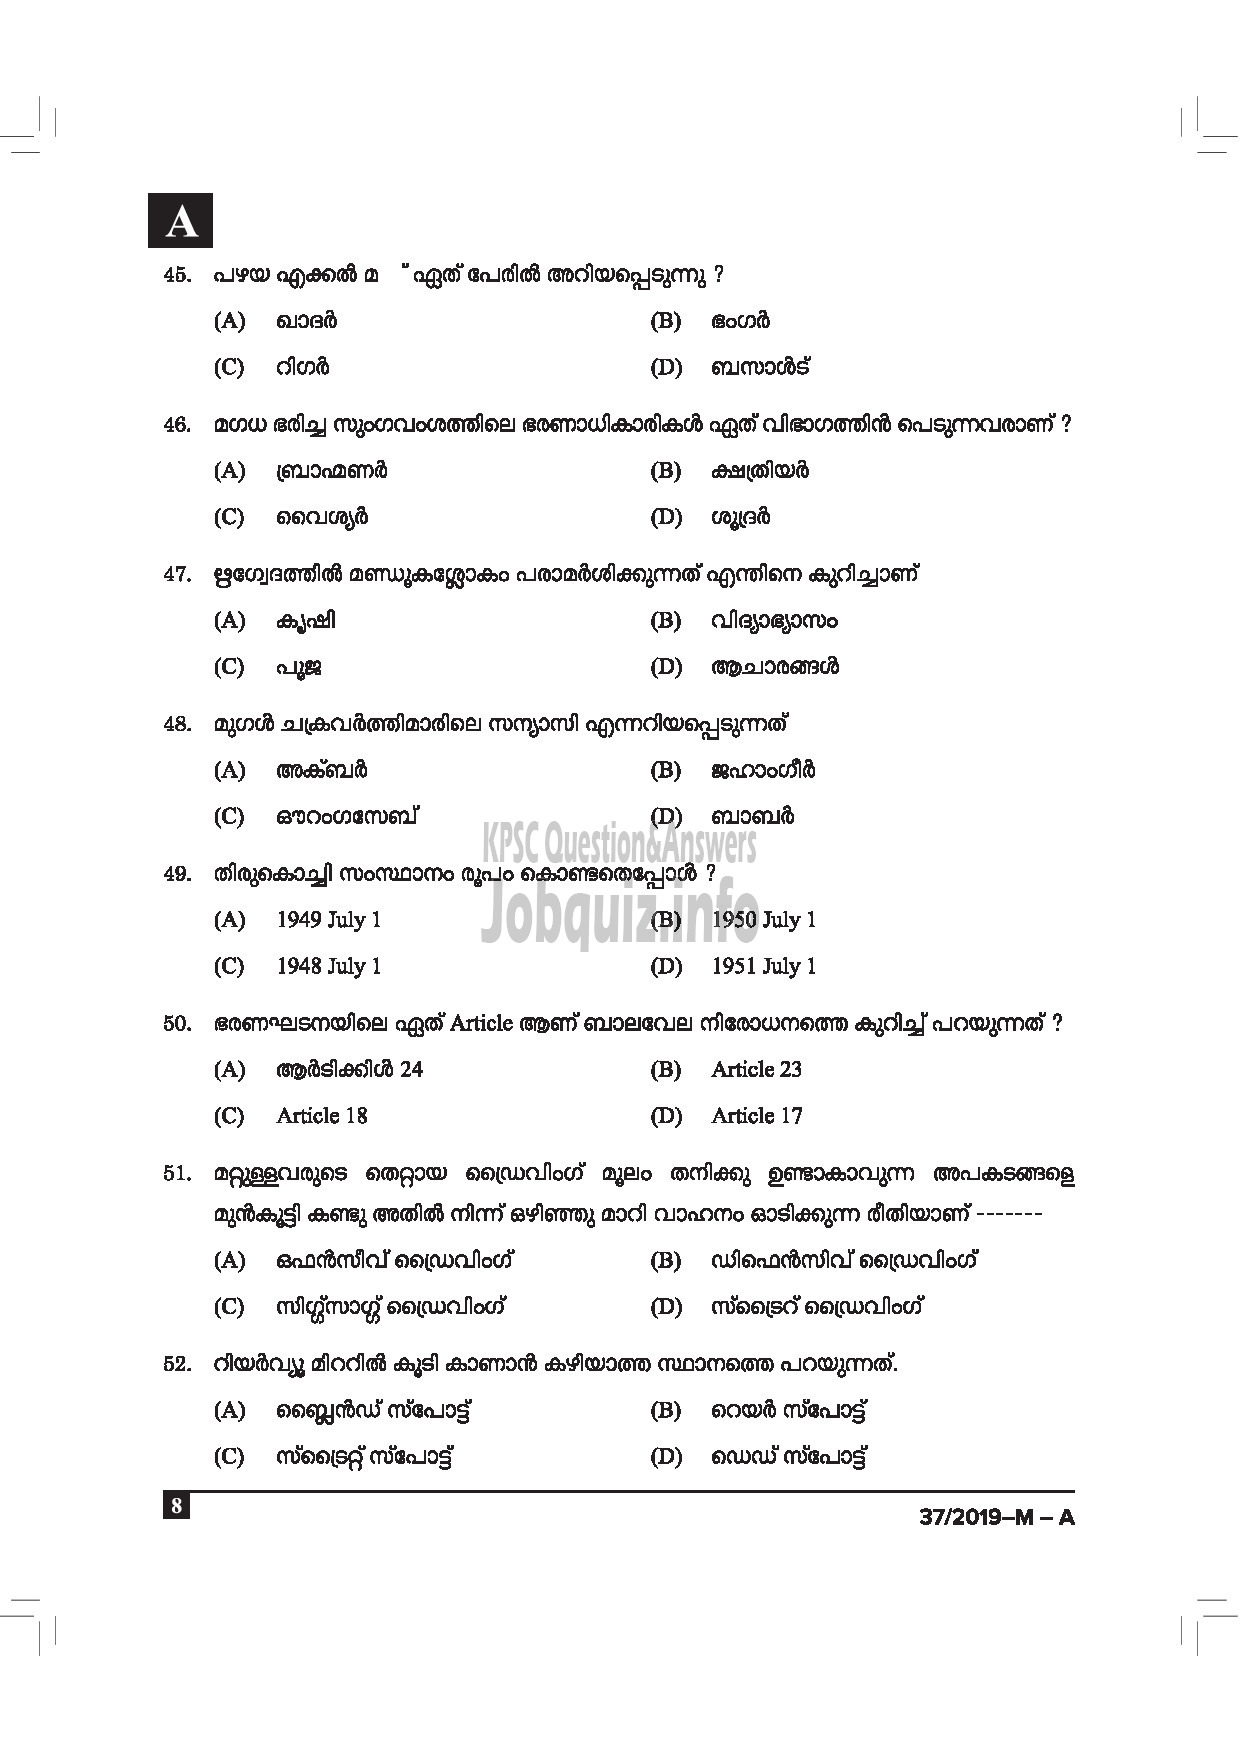 Kerala PSC Question Paper - DRIVER CUM OFFICE ATTENDANT / POLICE CONSTABLE DRIVER GOVT OWNED COMP / CORP / BOARD / POLICE MALAYALAM -8